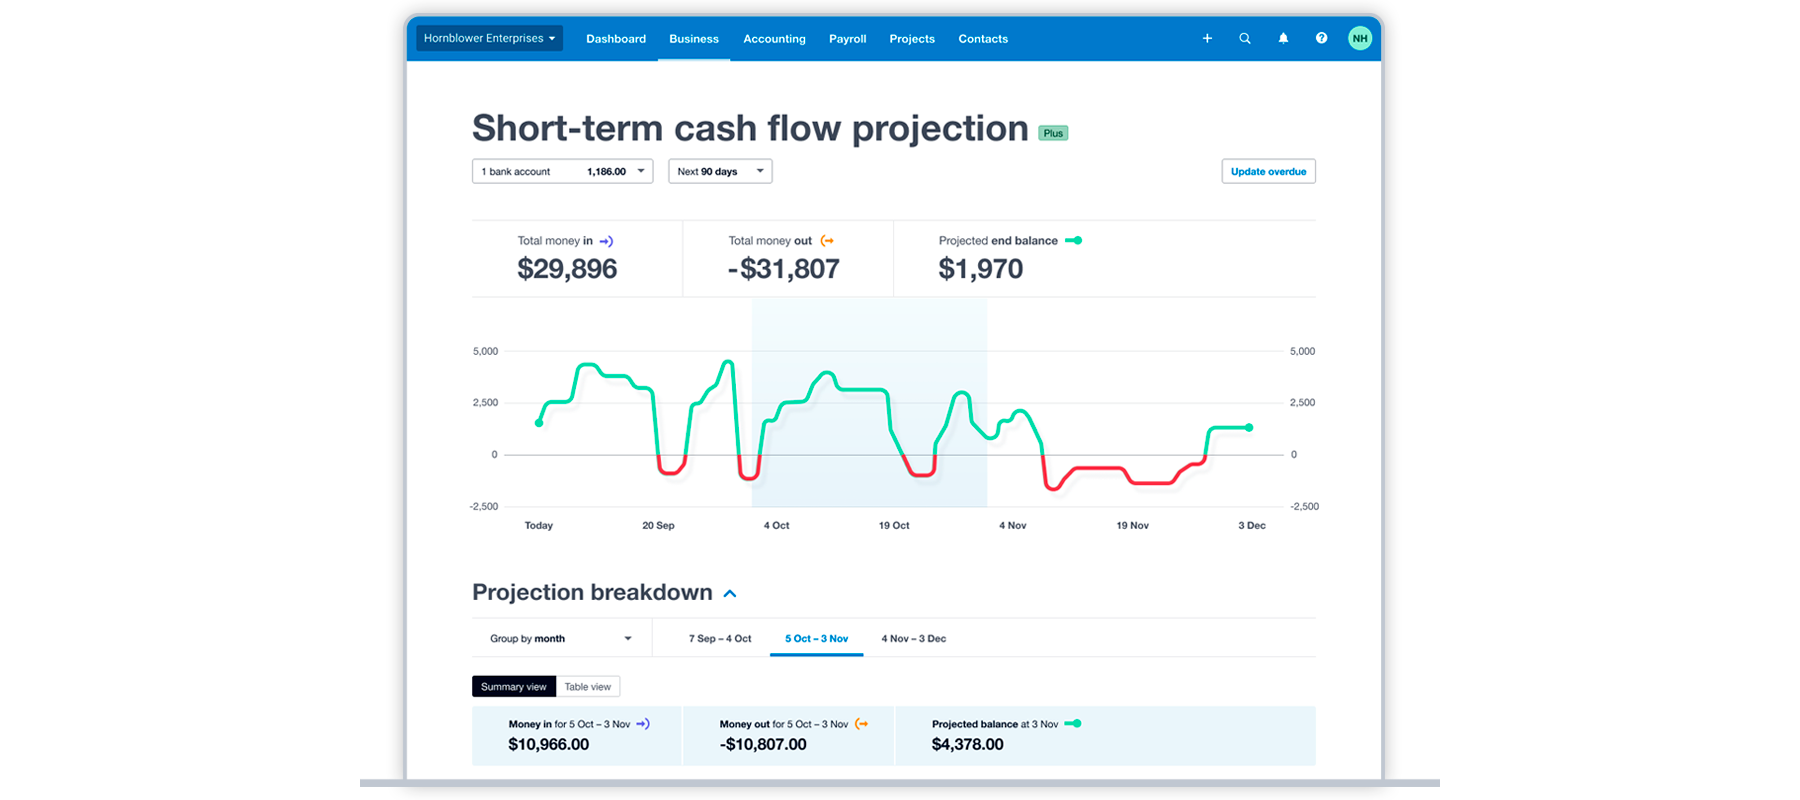 Xero cash flow forecast shows a projected cash balance over time as a line graph.